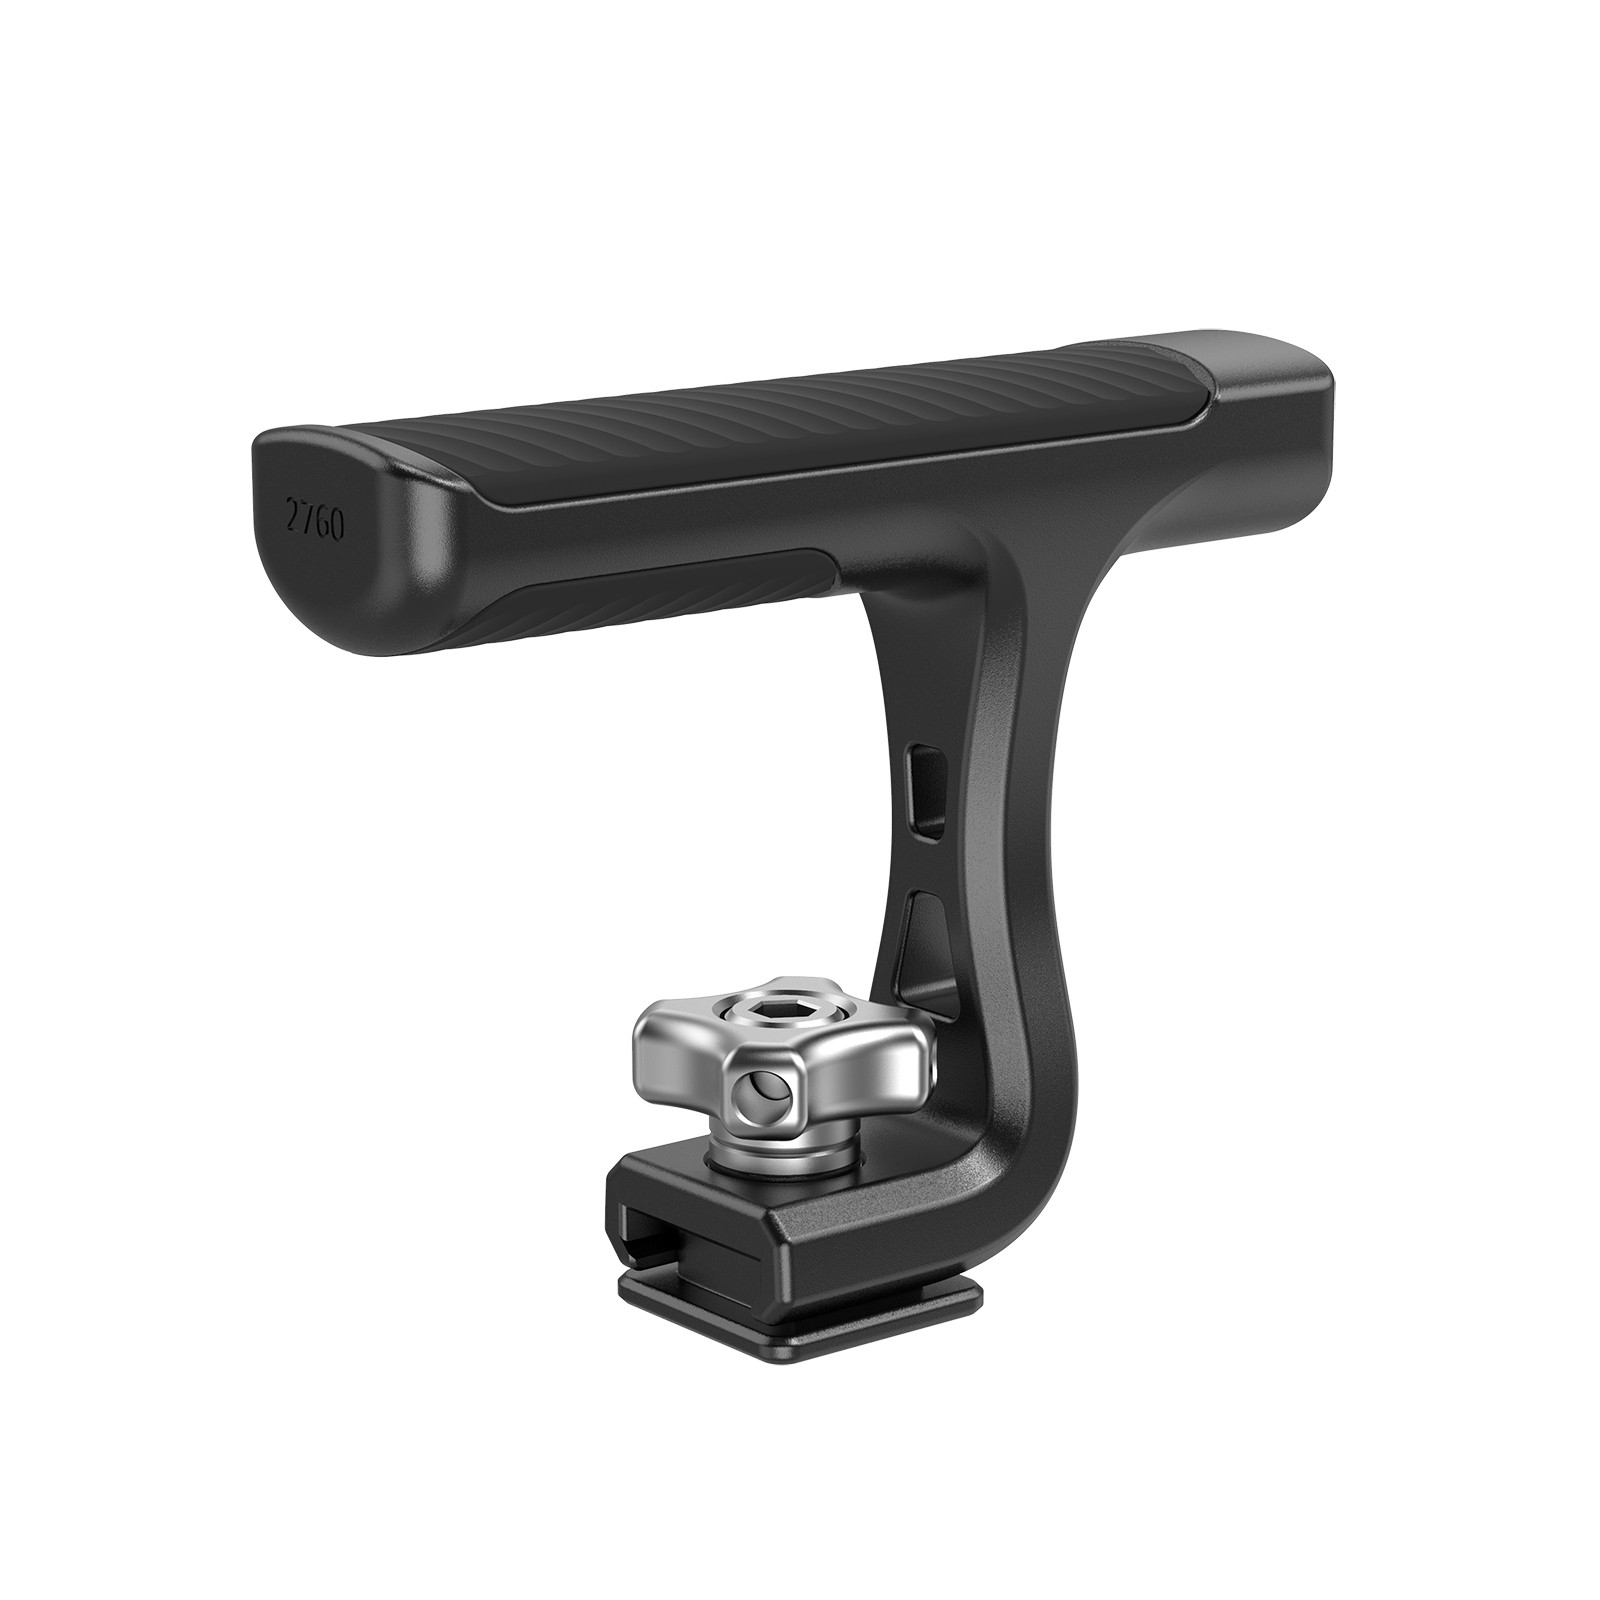 SmallRig Mini Top Handle for Light-weight Cameras (Cold Shoe Mount) 2760B